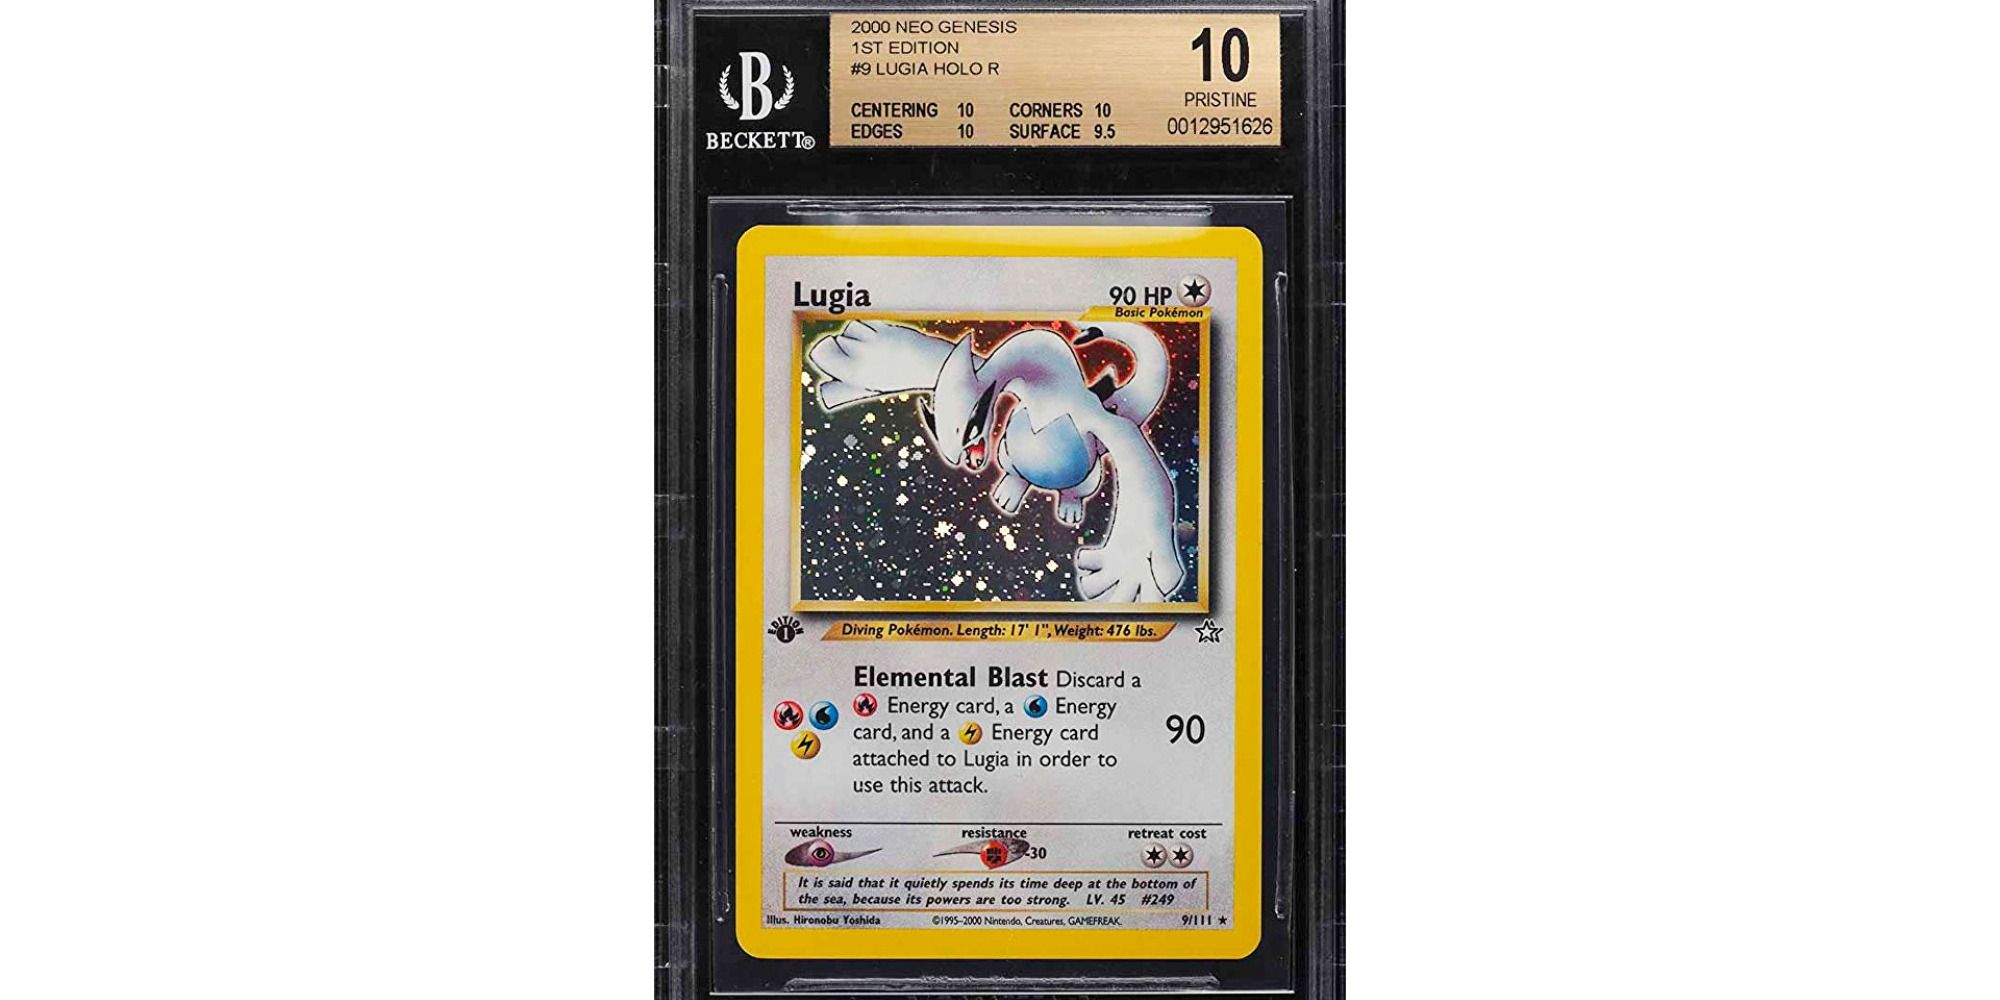 The 10 Most Expensive Pokemon Cards of 2022 - (English) : r